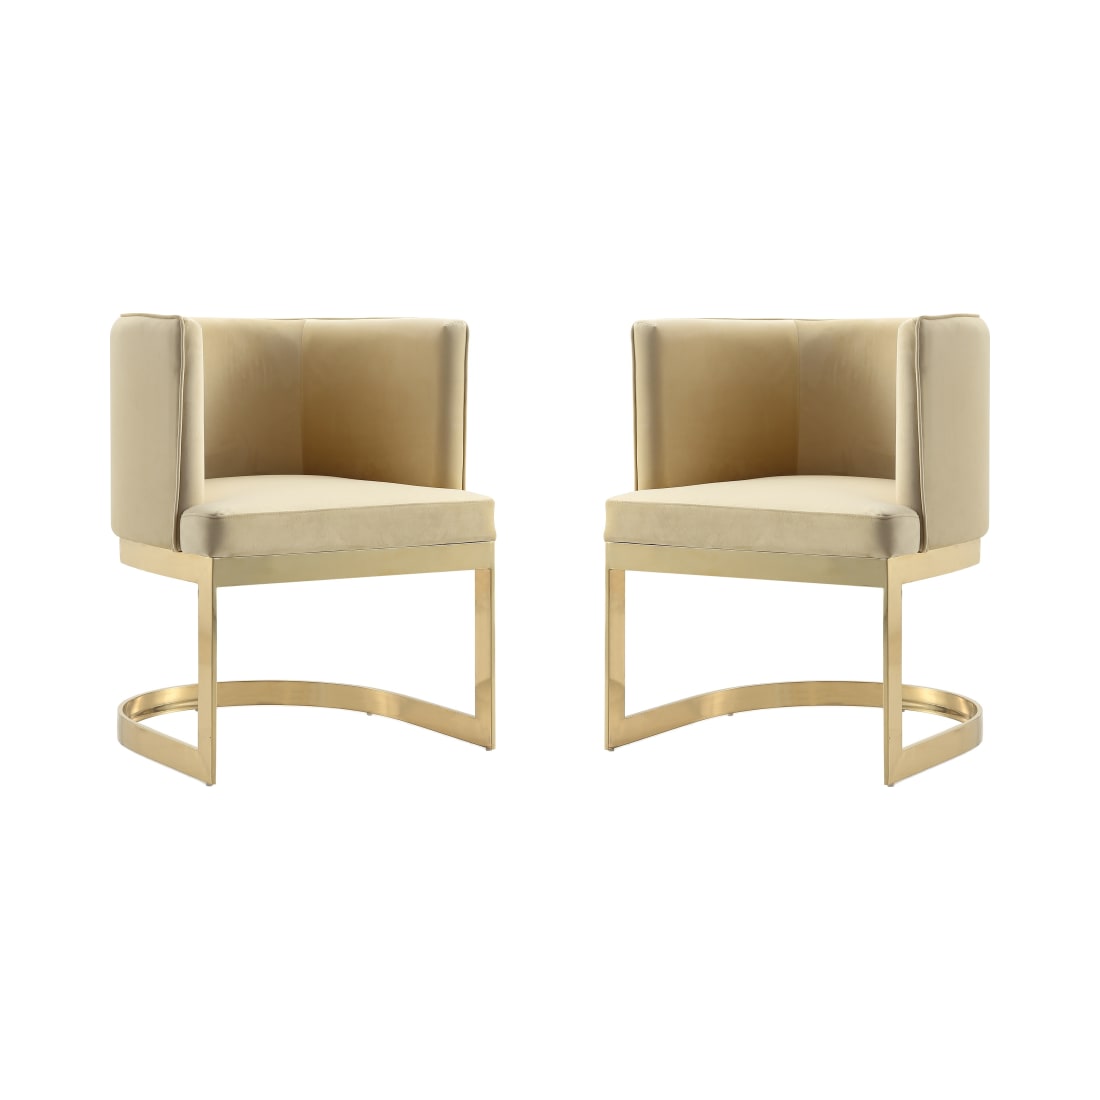 Aura Dining Chair in Sand and Polished Brass (Set of 2)